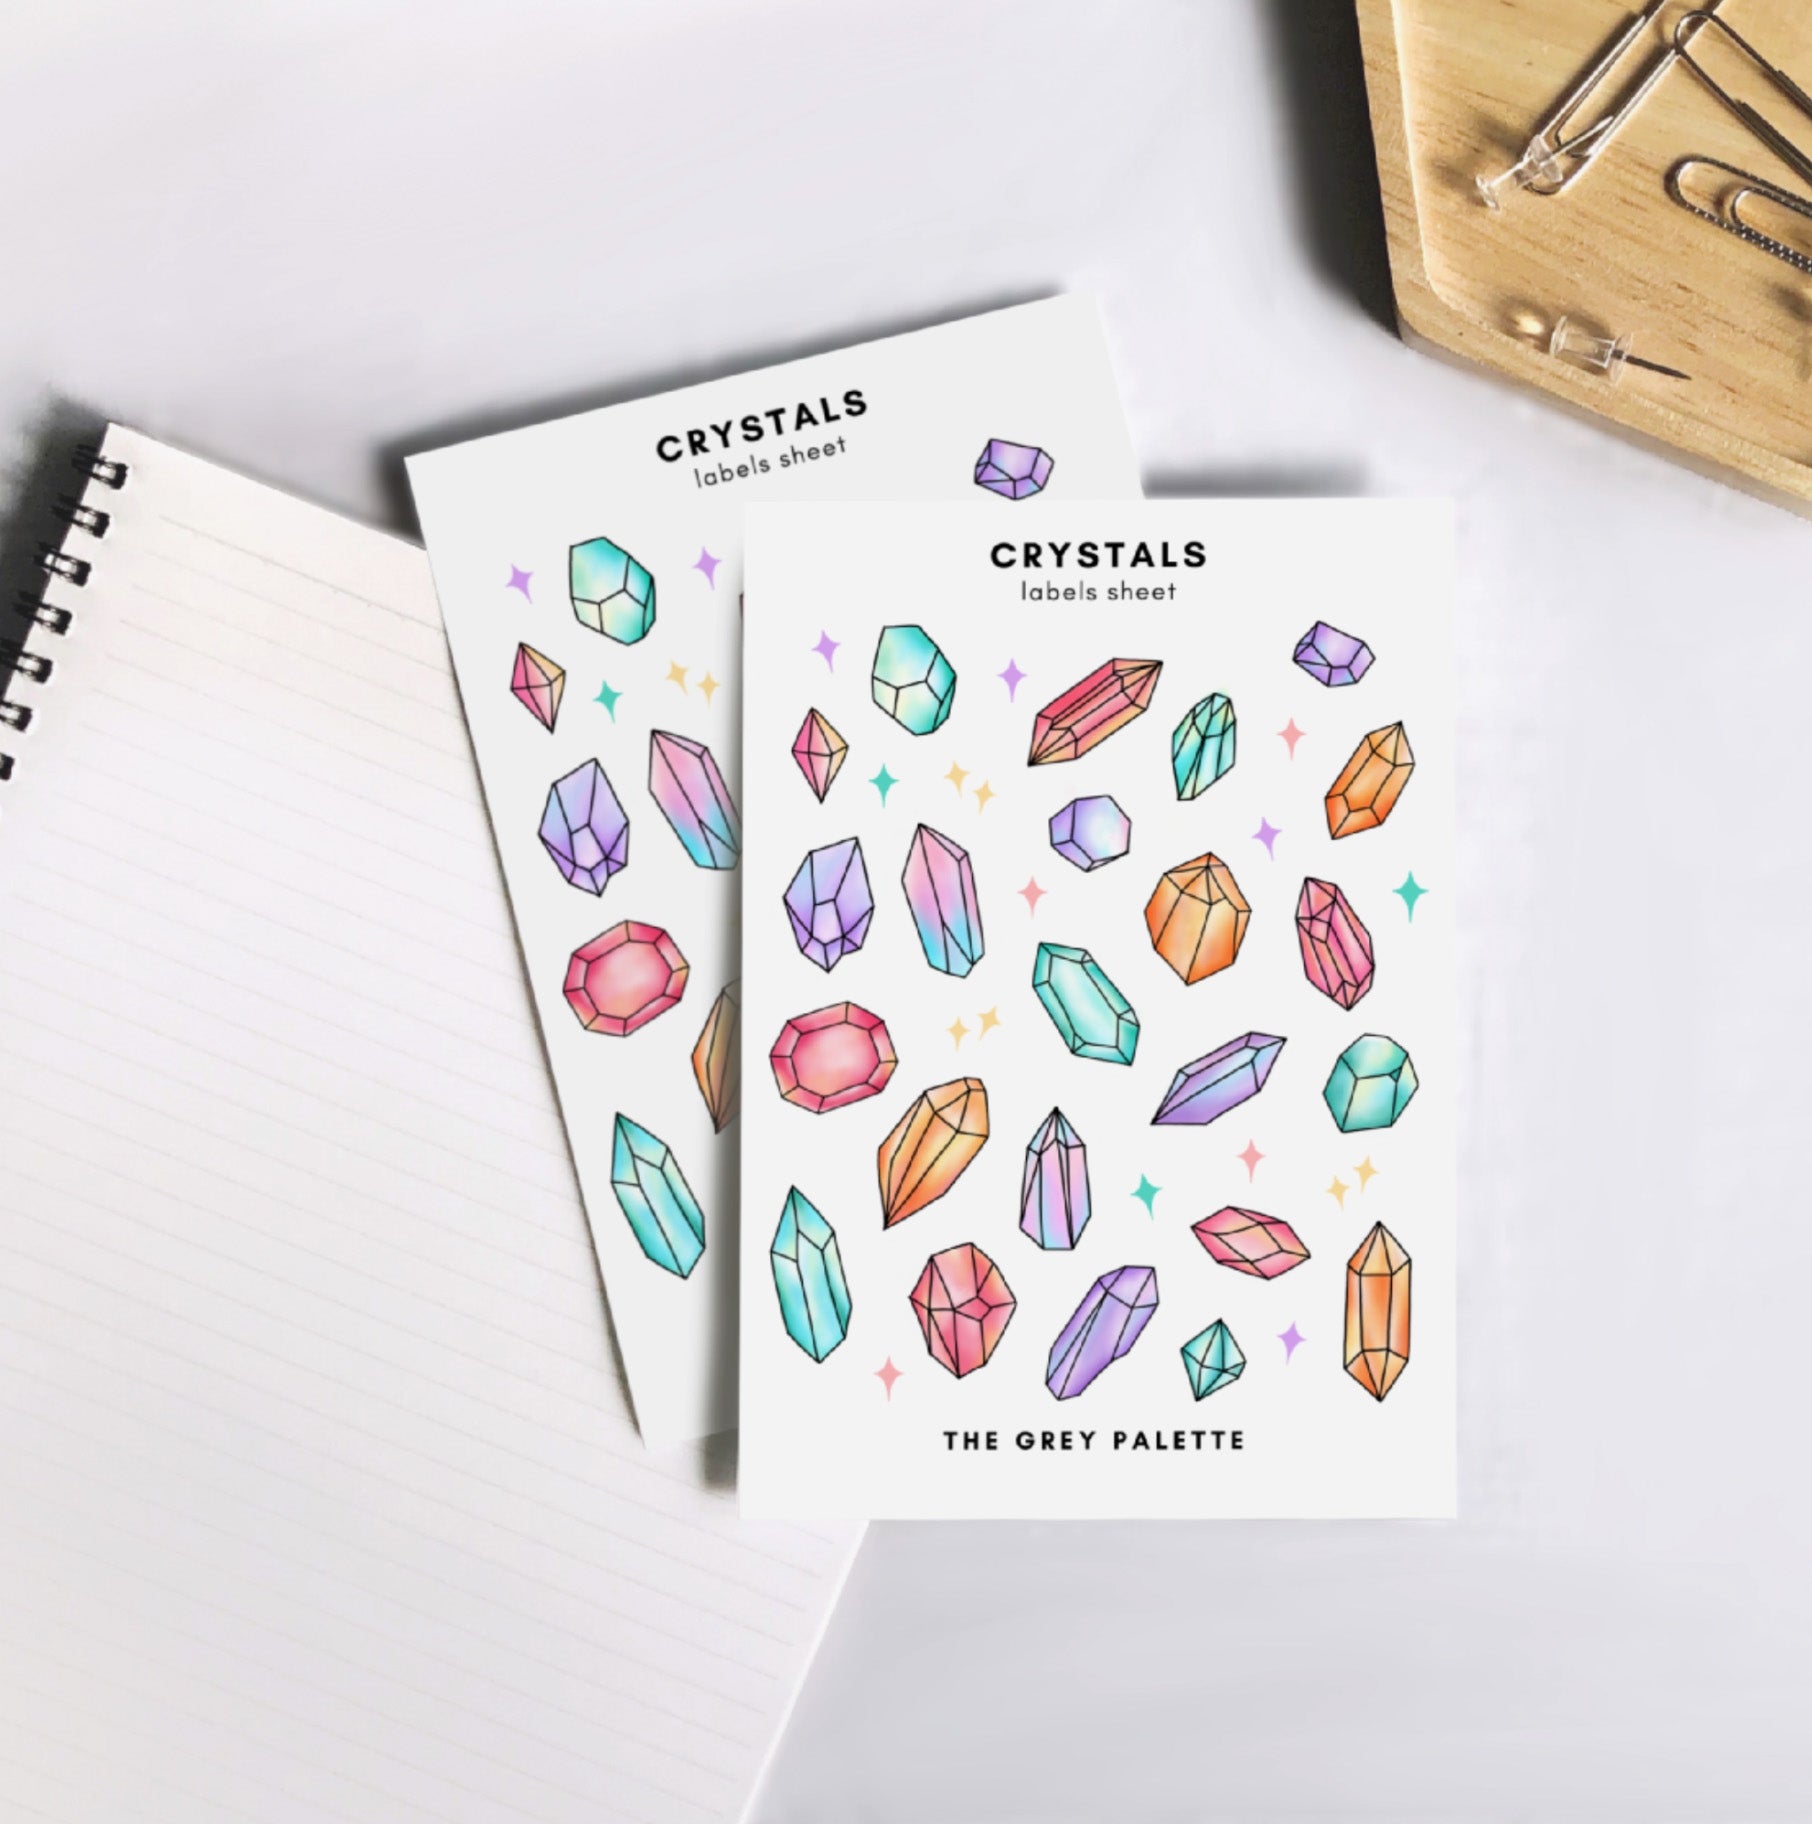 This sticker sheet features geode crystal formations perfect for decorating your planner, bujo or calendar. These stickers are designed by The Grey Palette and sold at BBB Supplies Craft Shop.